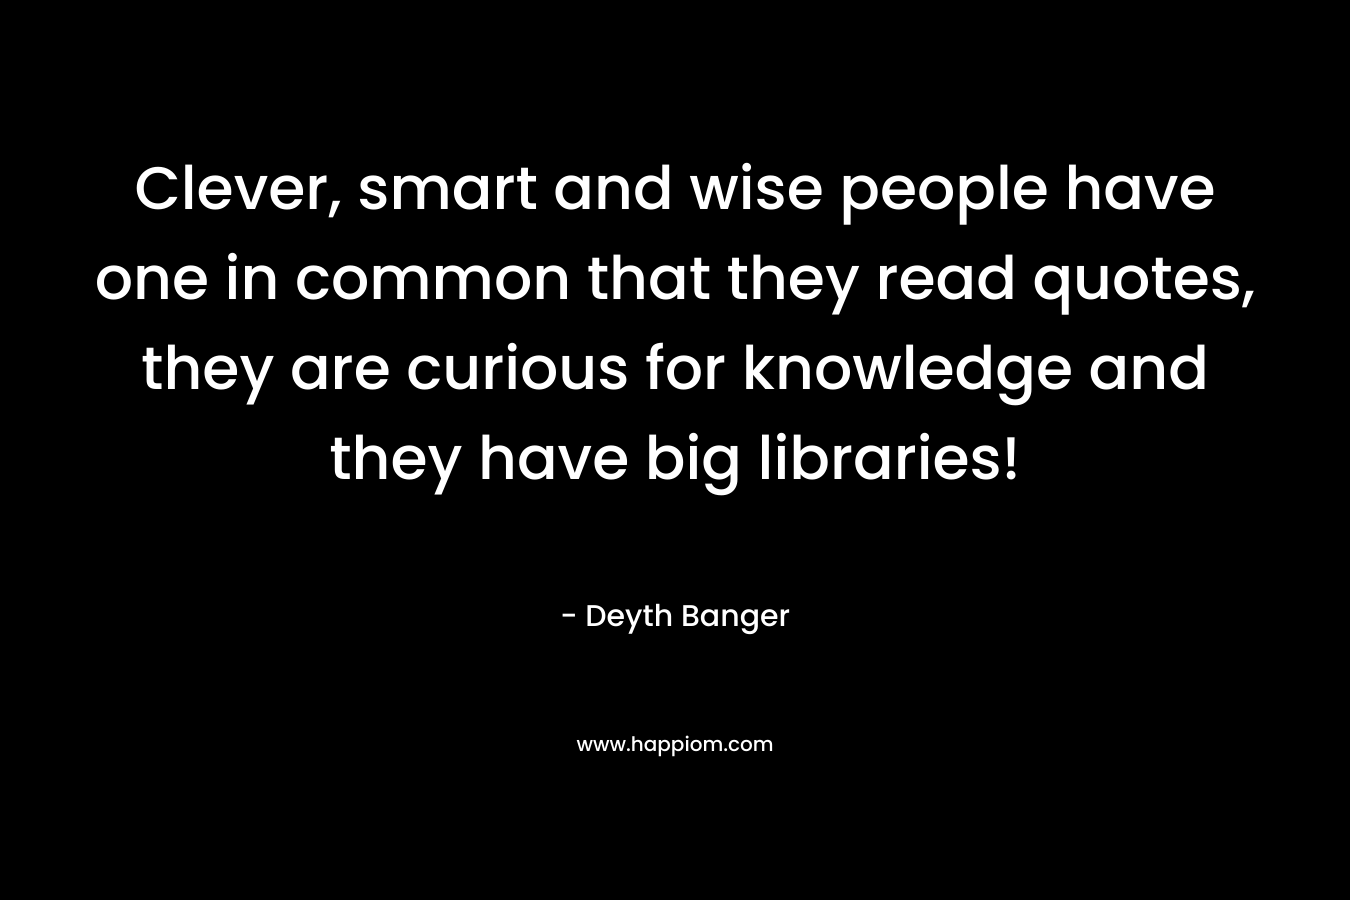 Clever, smart and wise people have one in common that they read quotes, they are curious for knowledge and they have big libraries! – Deyth Banger